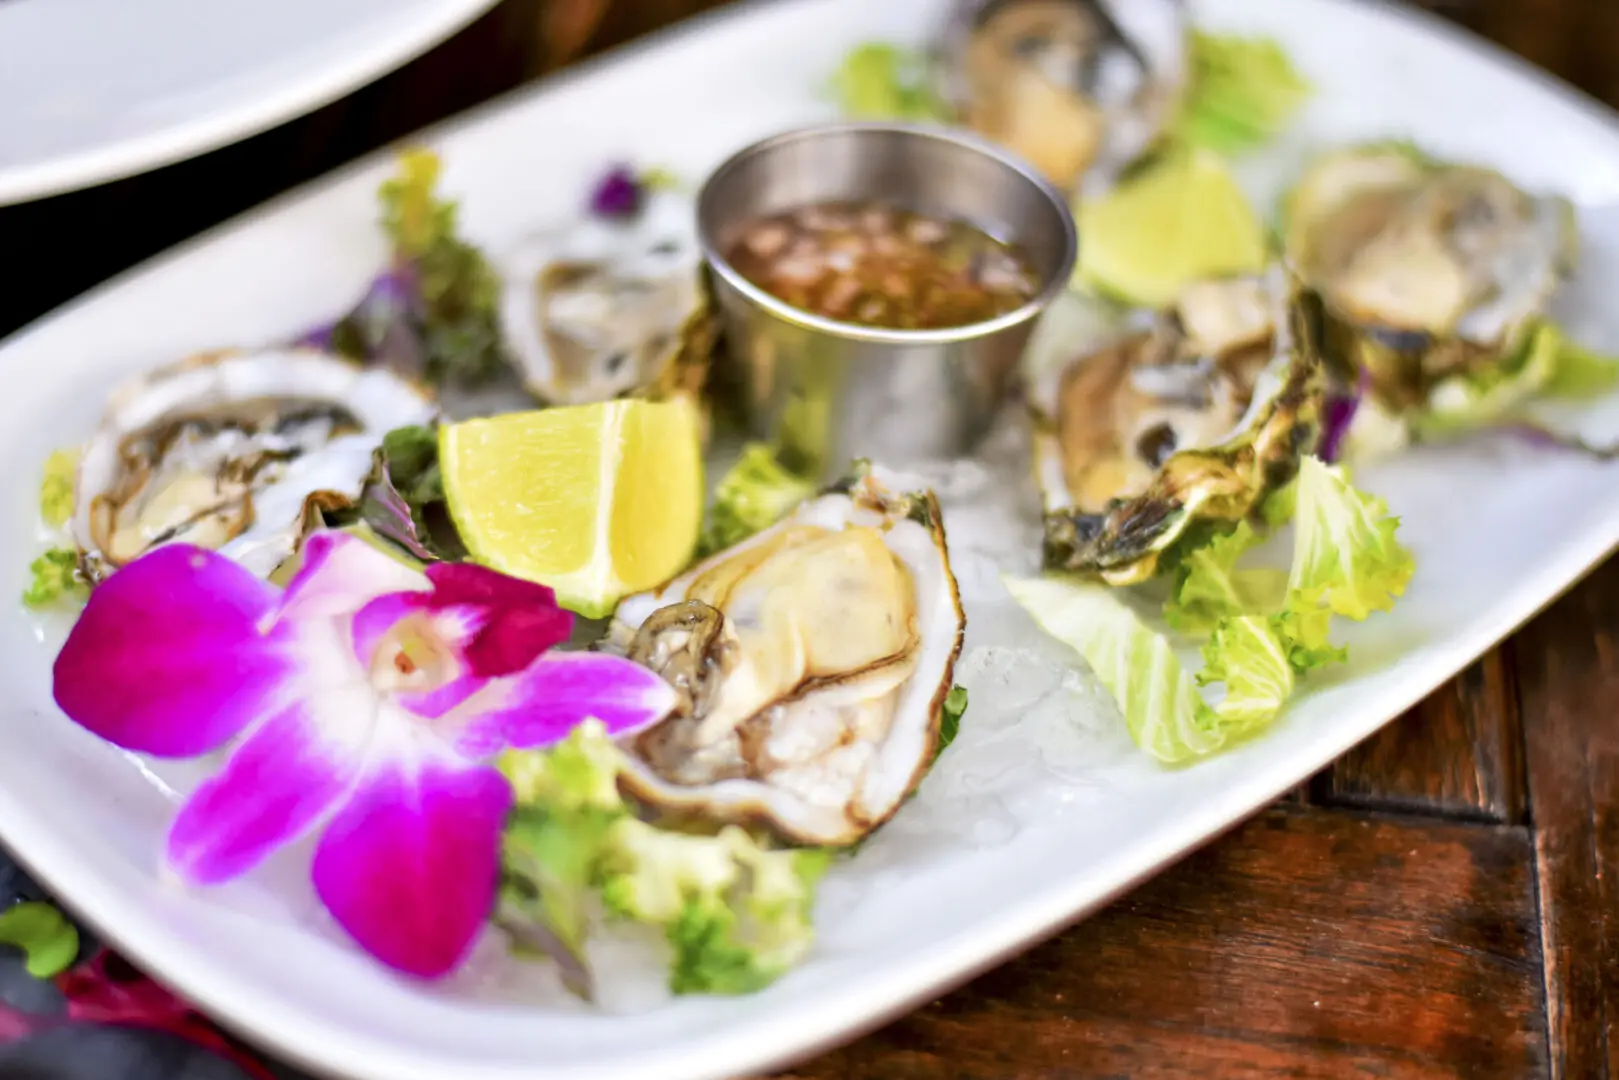 A plate of food with oysters and lemon.